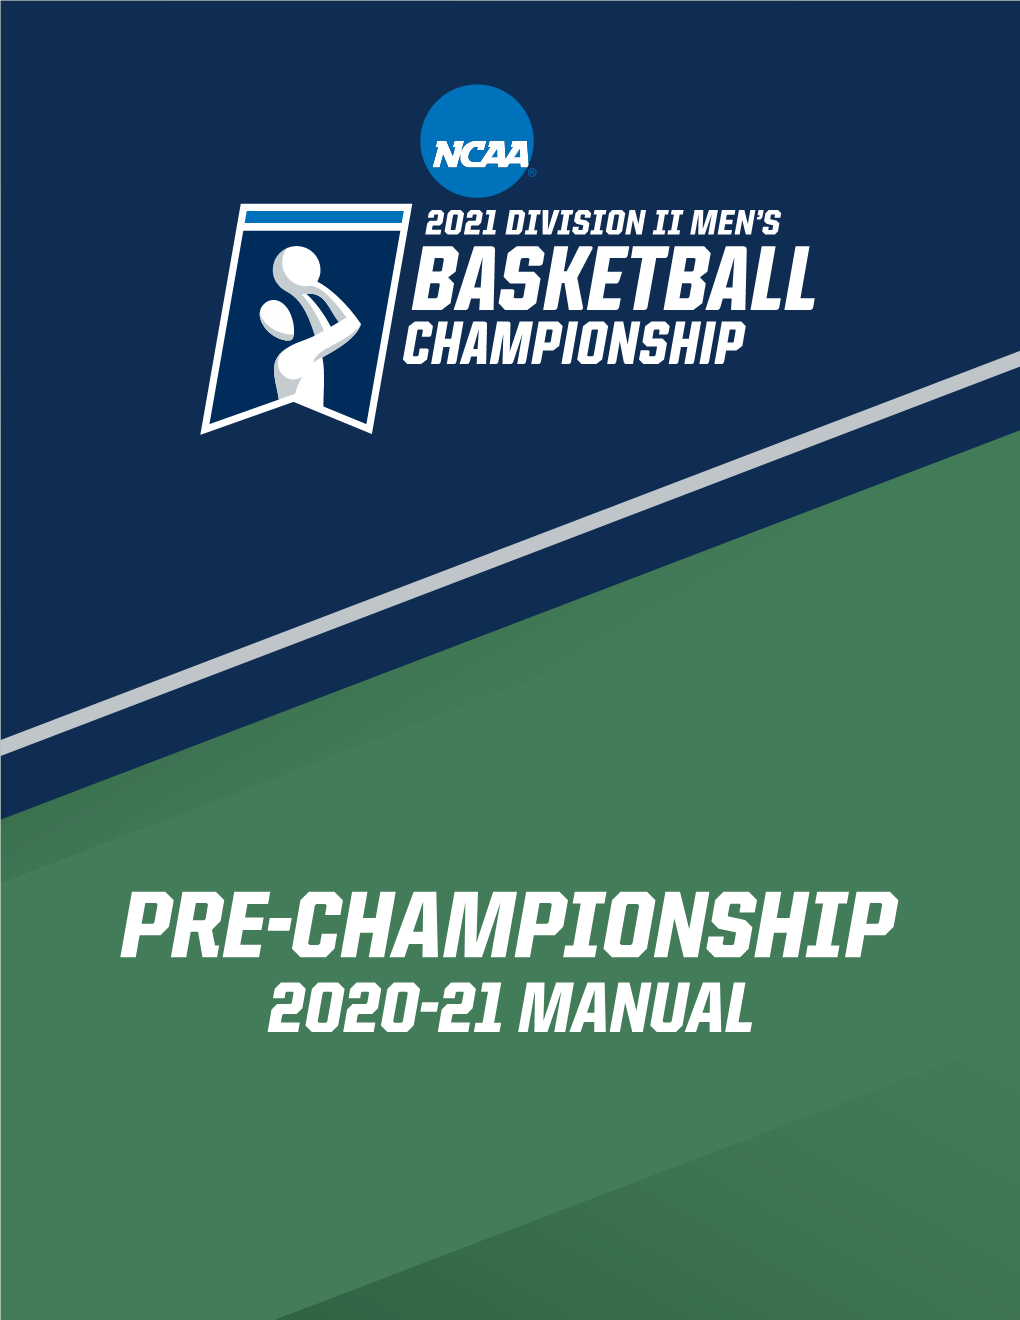 2020-21 MANUAL NCAA General Administrative Guidelines